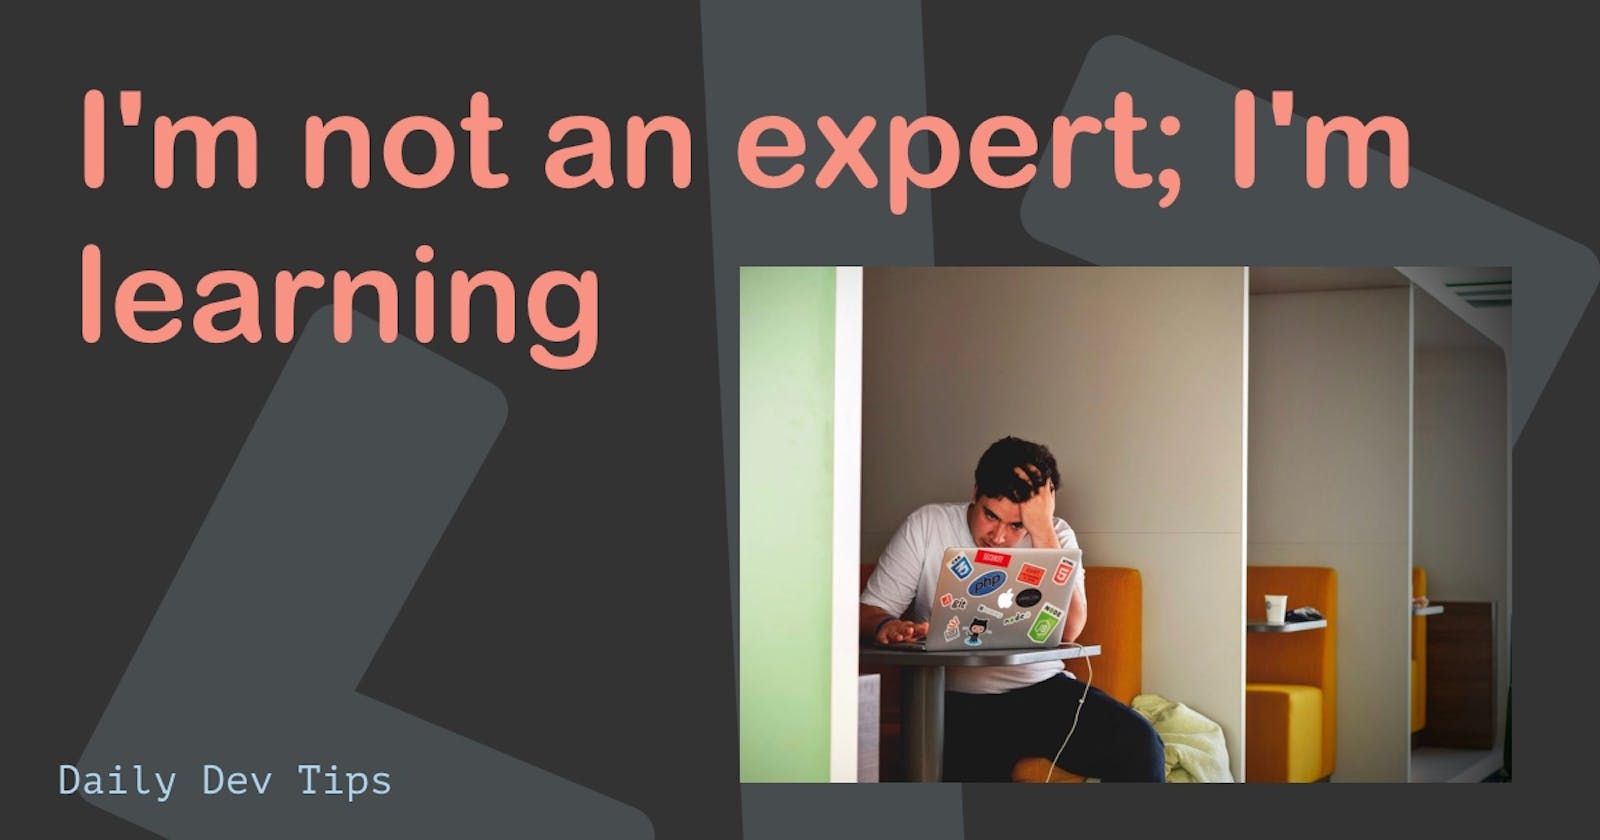 I'm not an expert; I'm learning